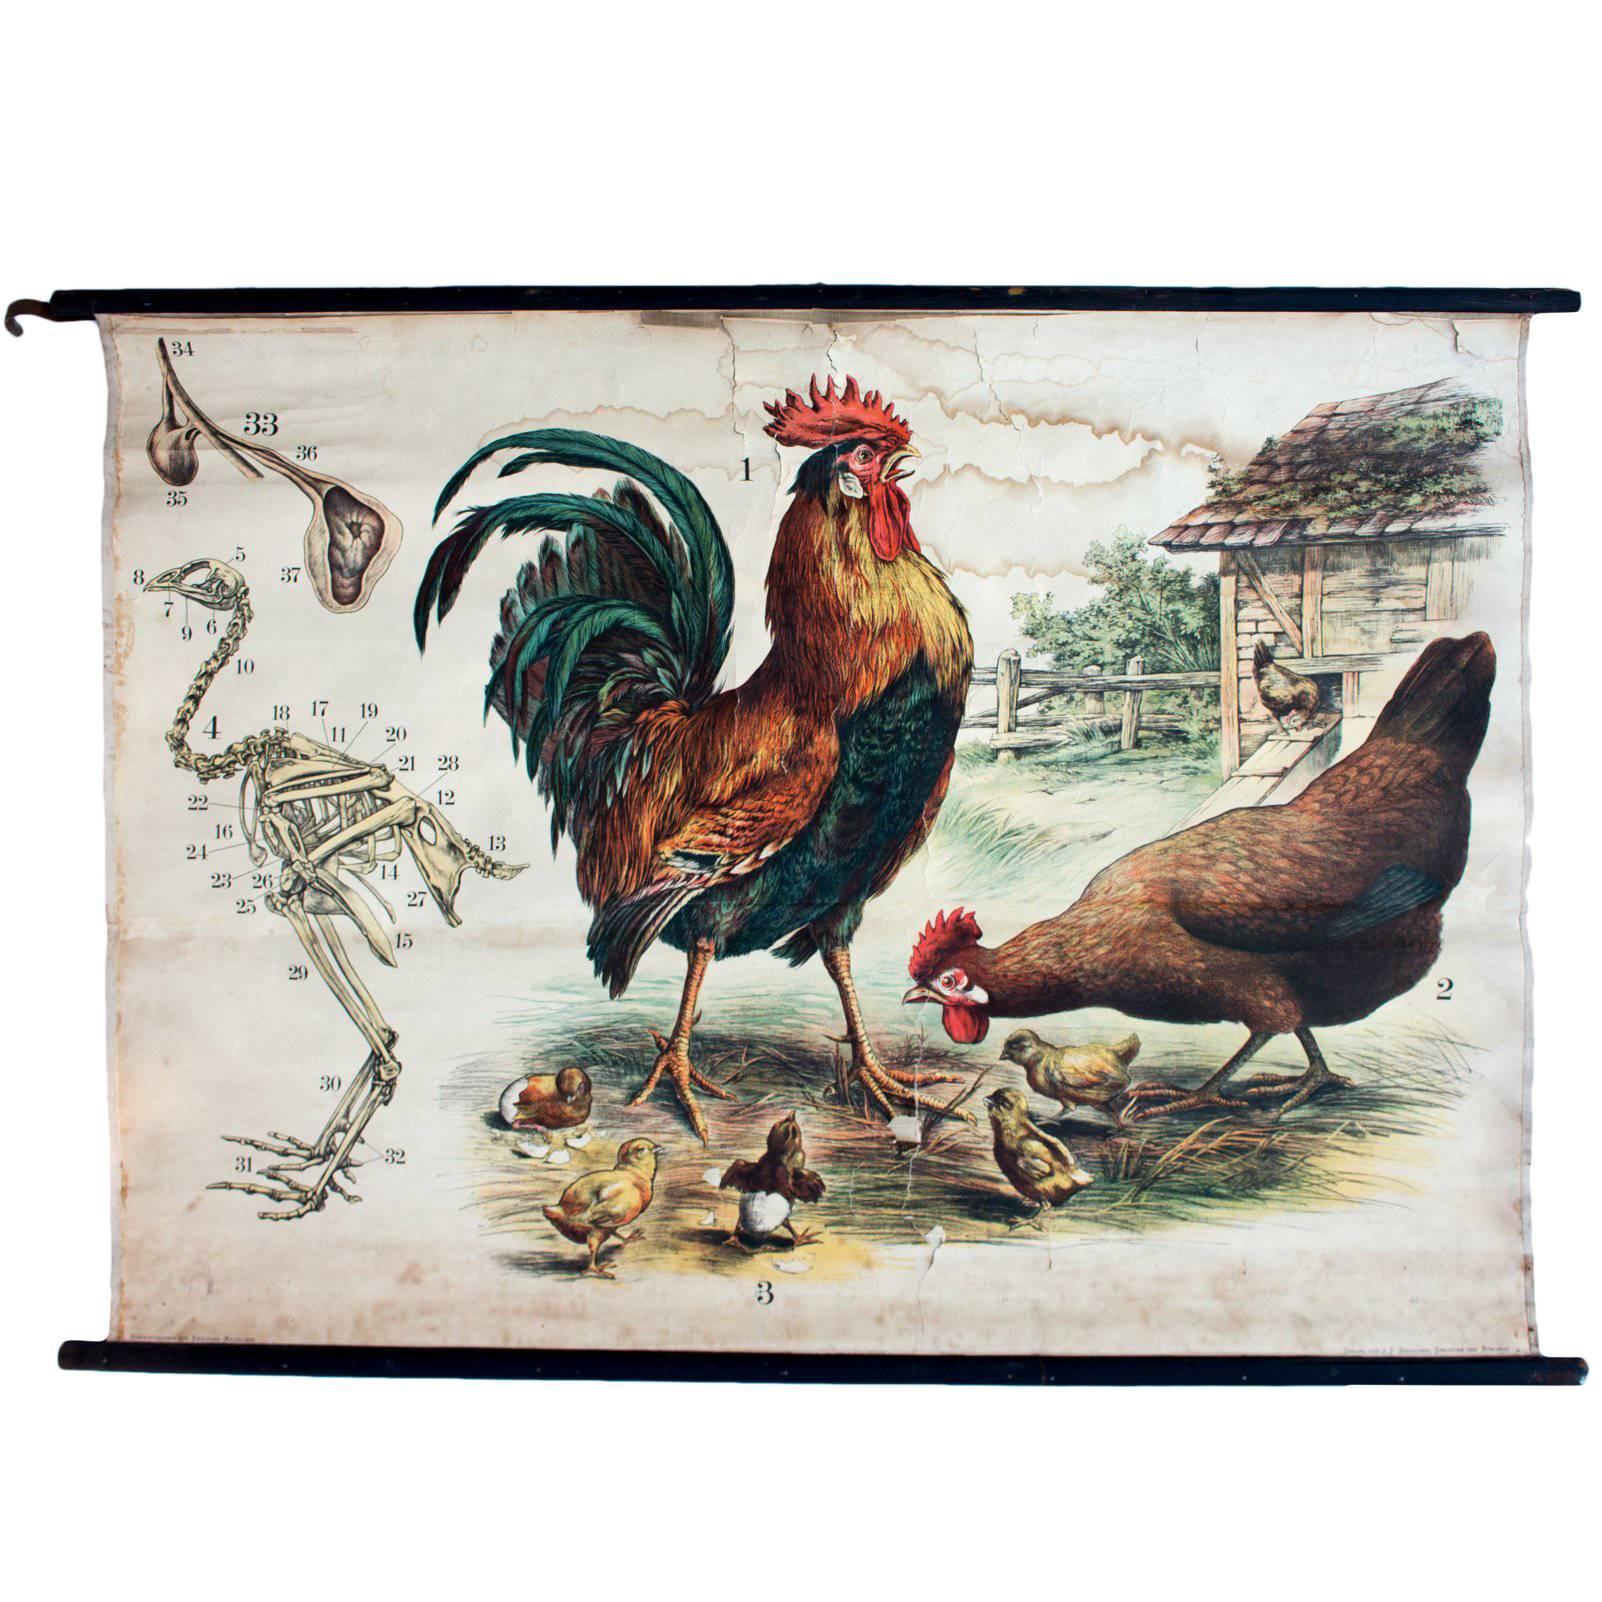 Chicken, Engleders Wall Charts, Lithograph by J. F. Schreiber, 1893